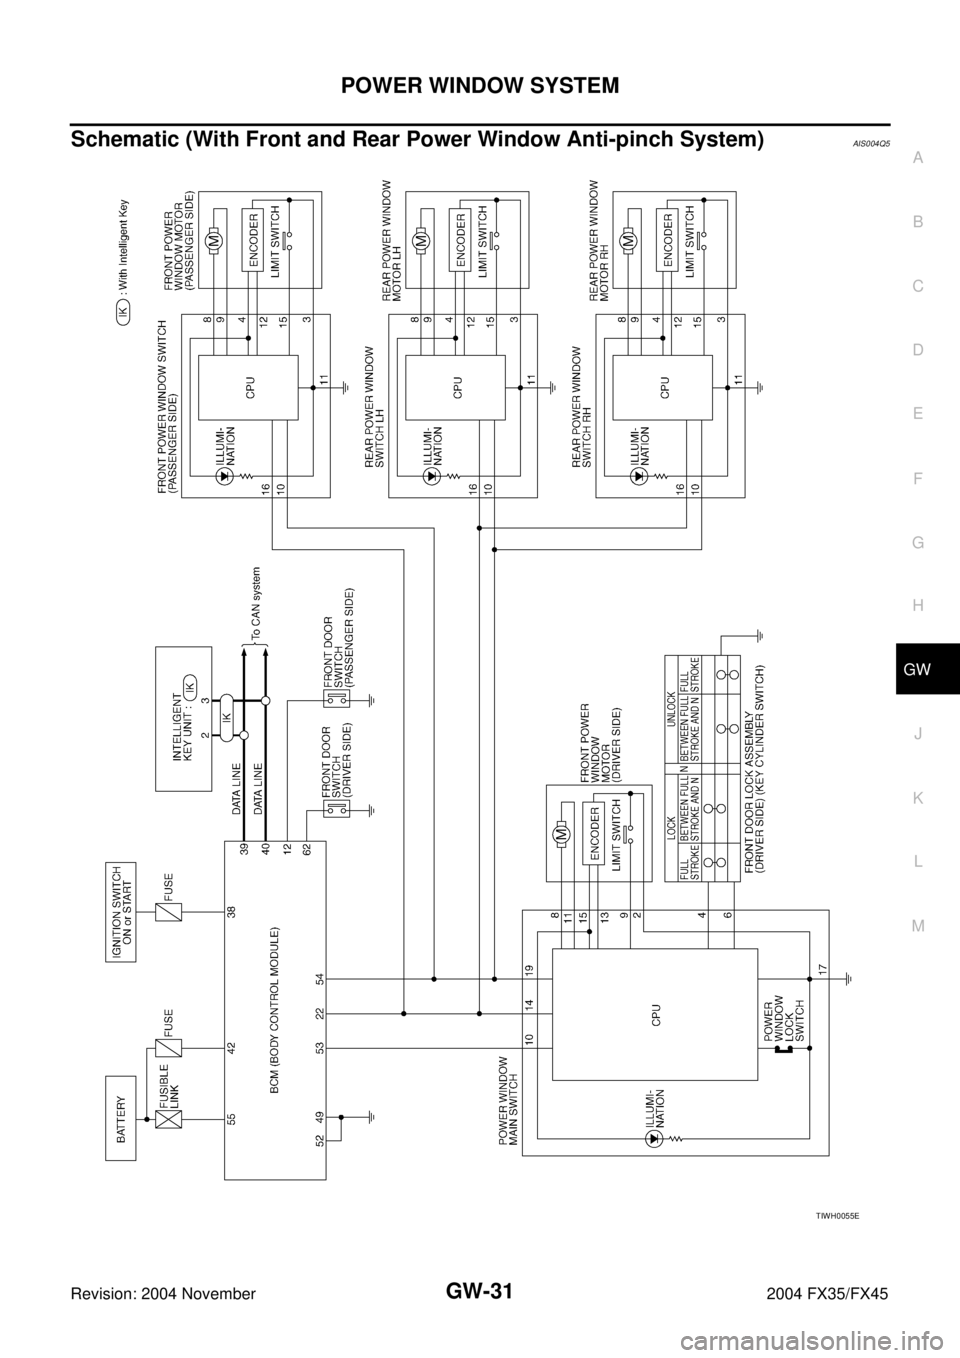 INFINITI FX35 2004  Service Manual POWER WINDOW SYSTEM
GW-31
C
D
E
F
G
H
J
K
L
MA
B
GW
Revision: 2004 November 2004 FX35/FX45
Schematic (With Front and Rear Power Window Anti-pinch System)AIS004Q5
TIWH0055E 